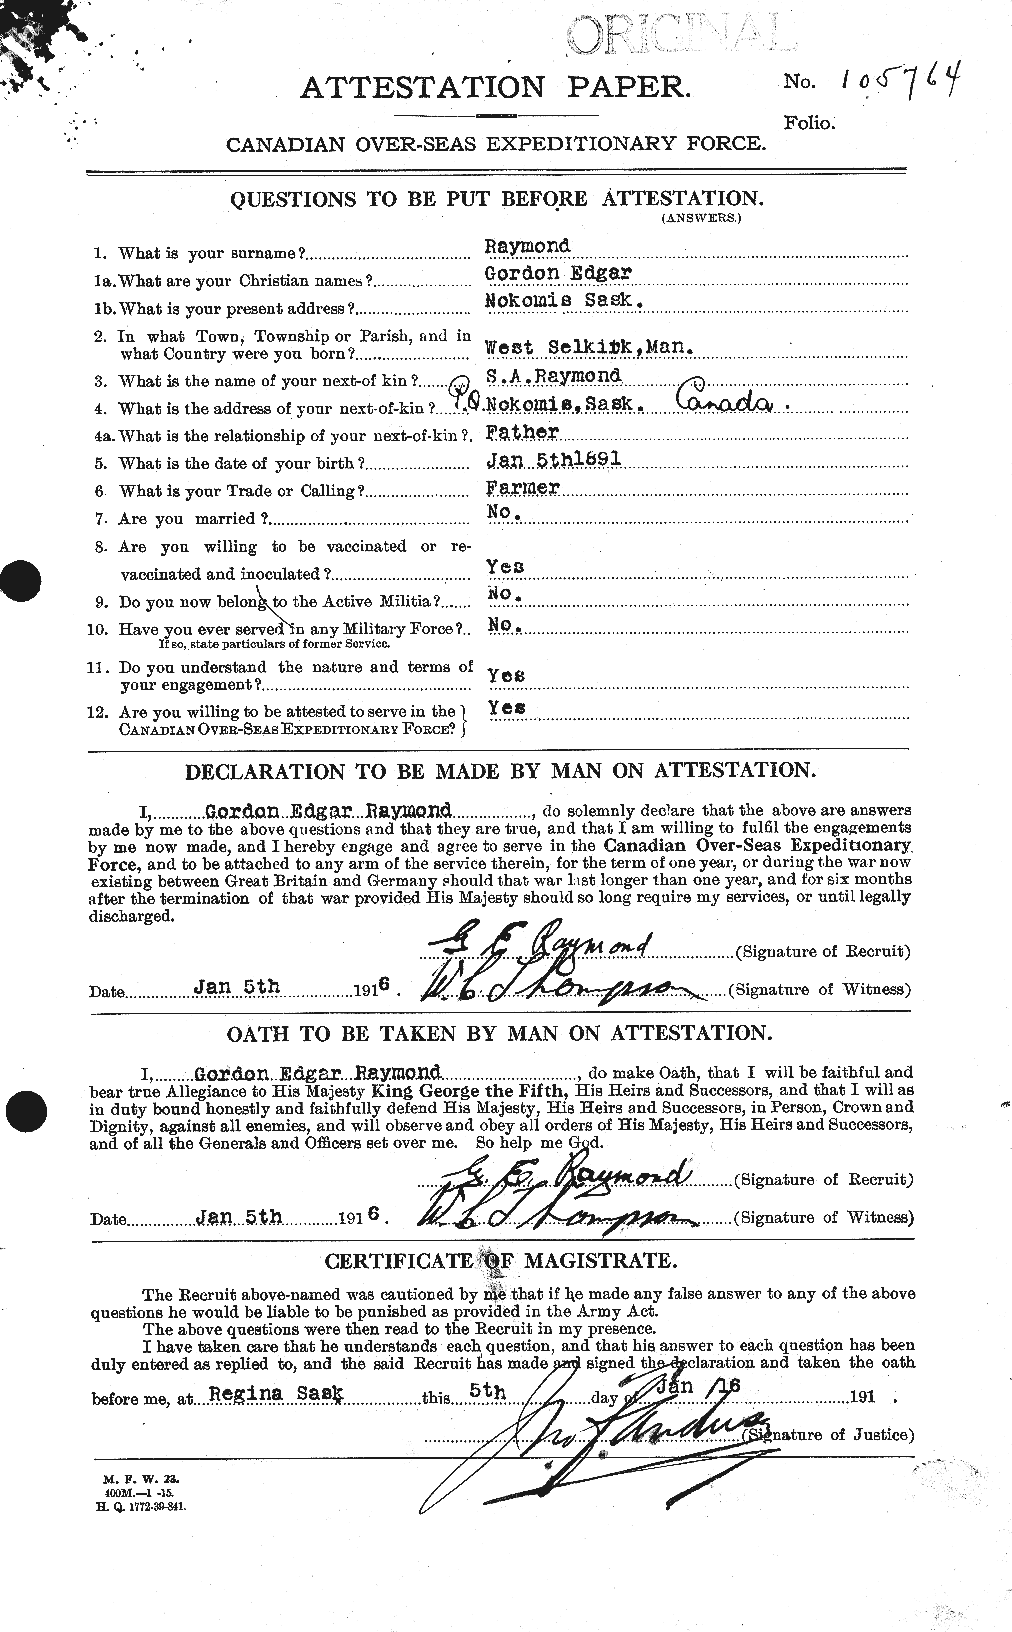 Personnel Records of the First World War - CEF 595347a